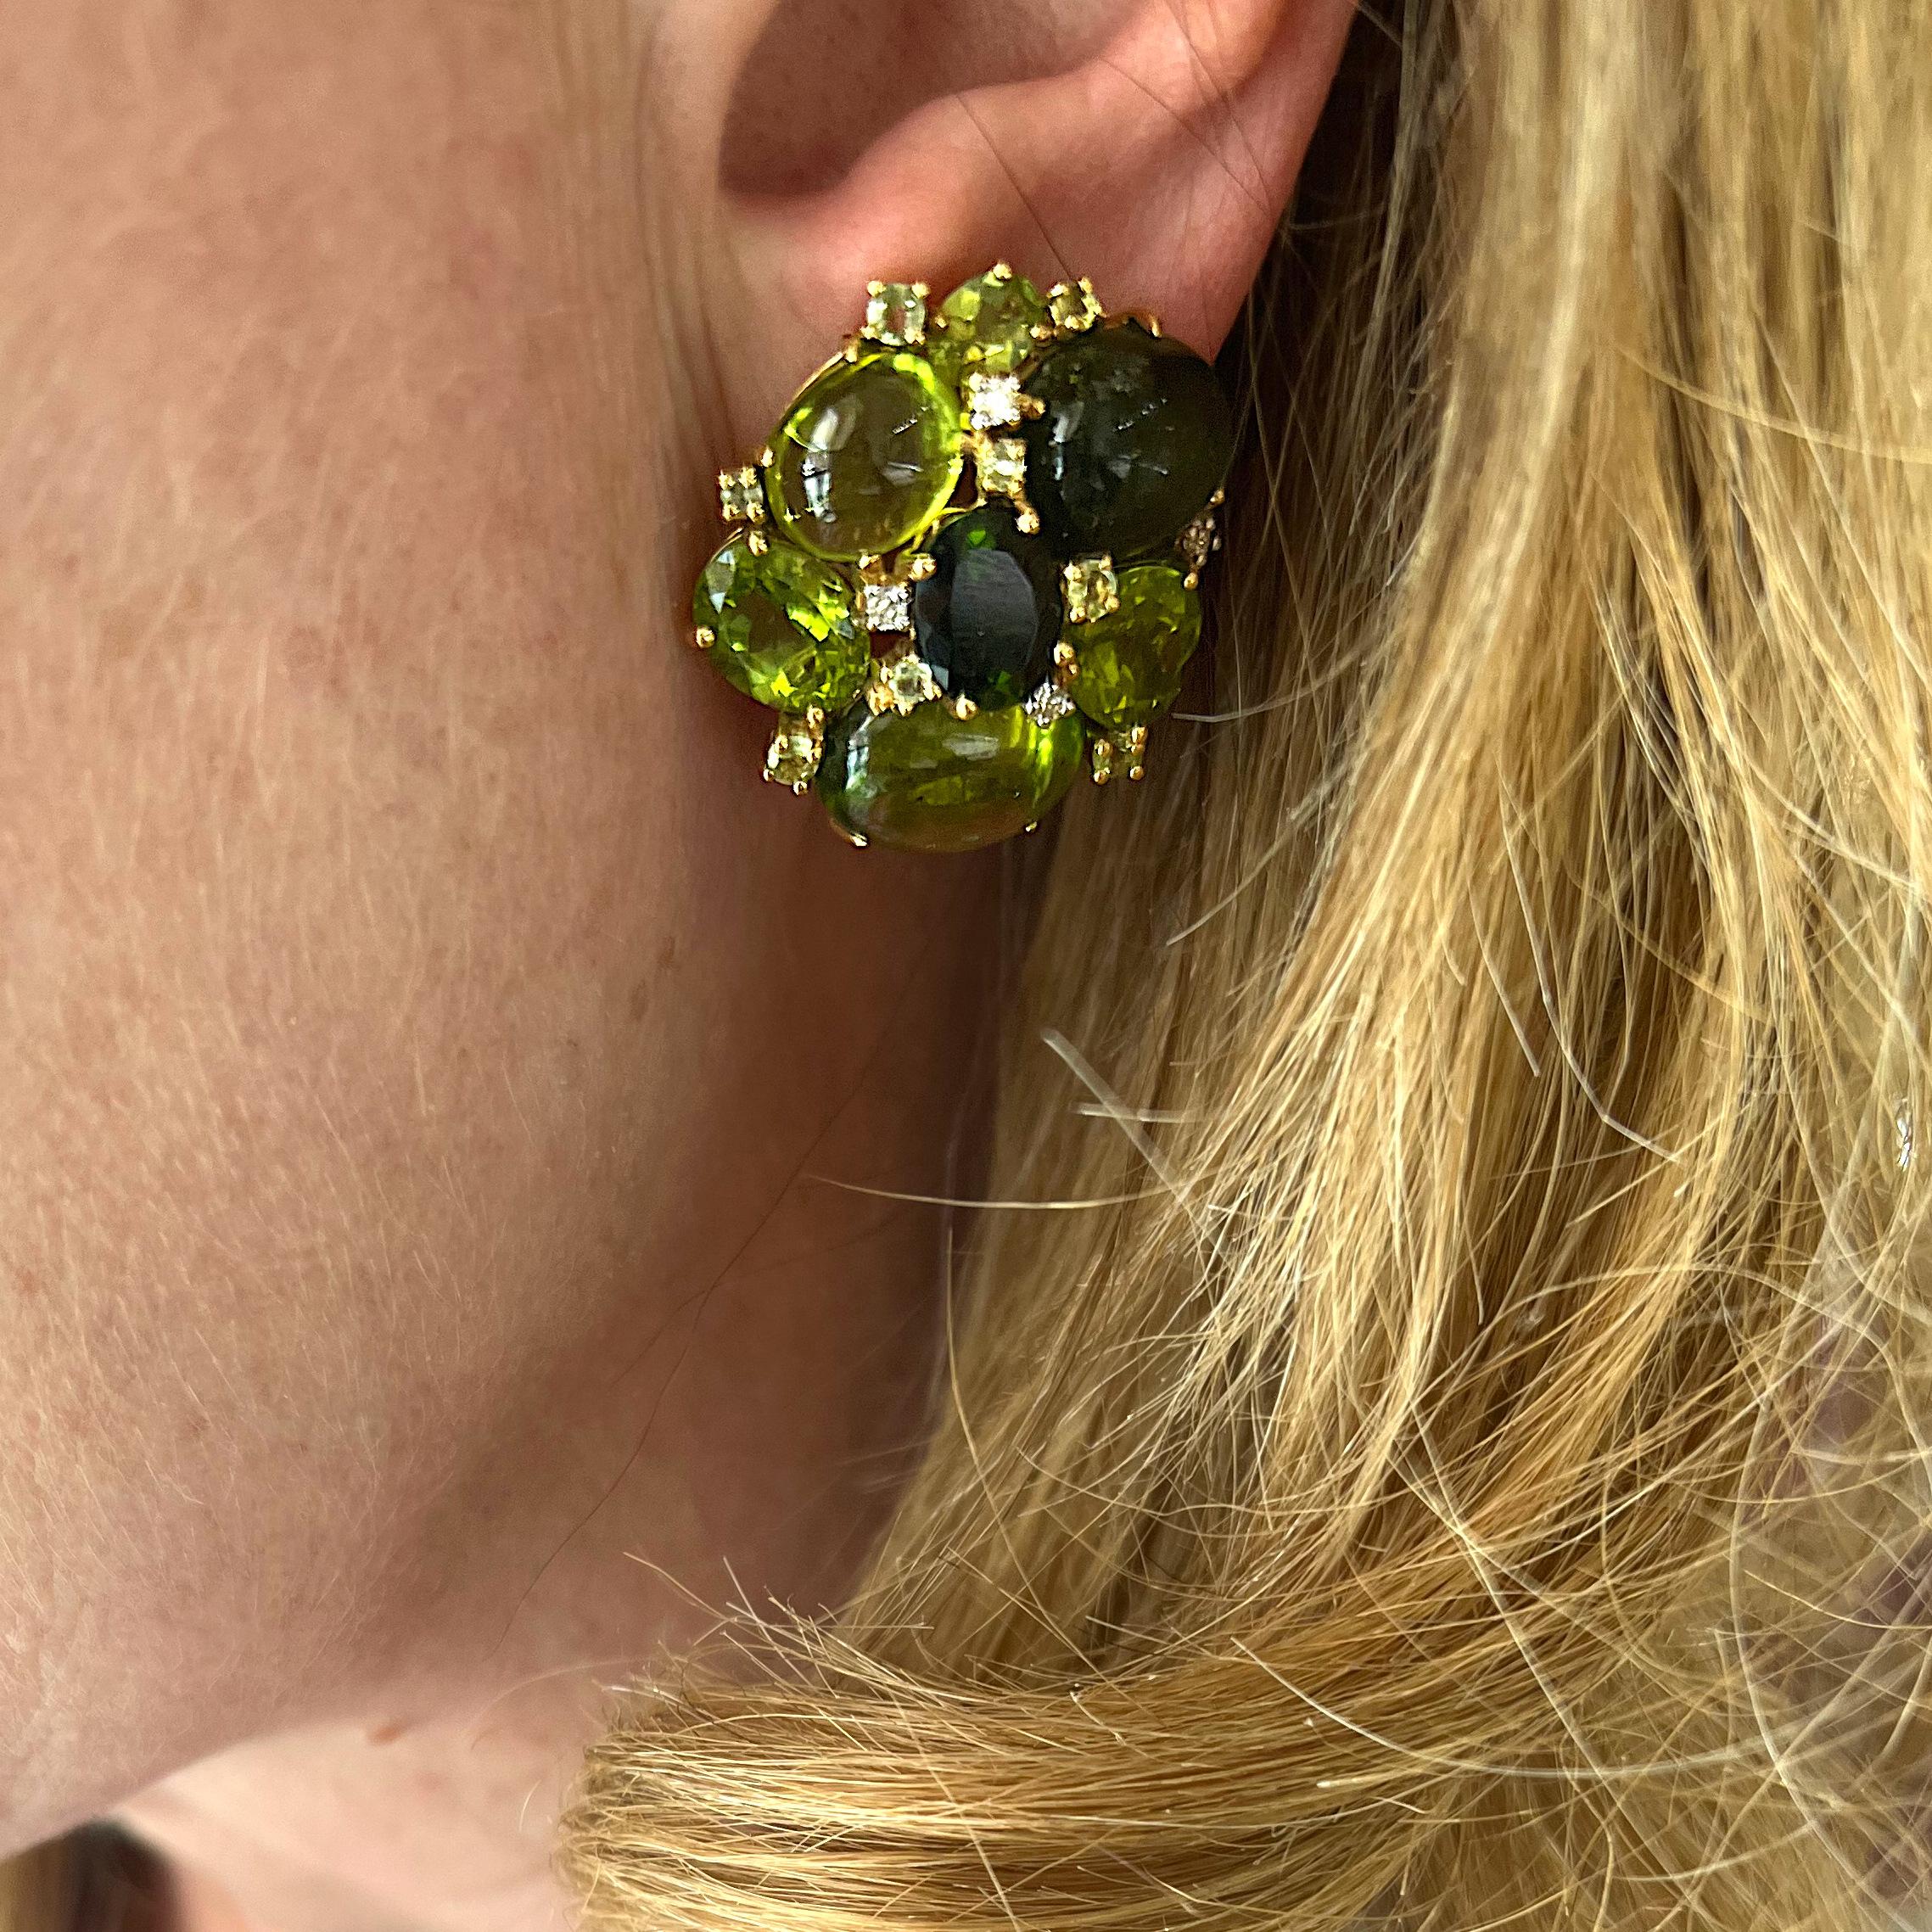 A pair of tourmaline and peridot earrings, mounted in 18ct gold, set with mixed cuts of green tourmaline, with a total weight of 15.40ct, peridot, with a total weight of 32.31ct and round brilliant-cut diamonds with a total weight of 0.23ct.